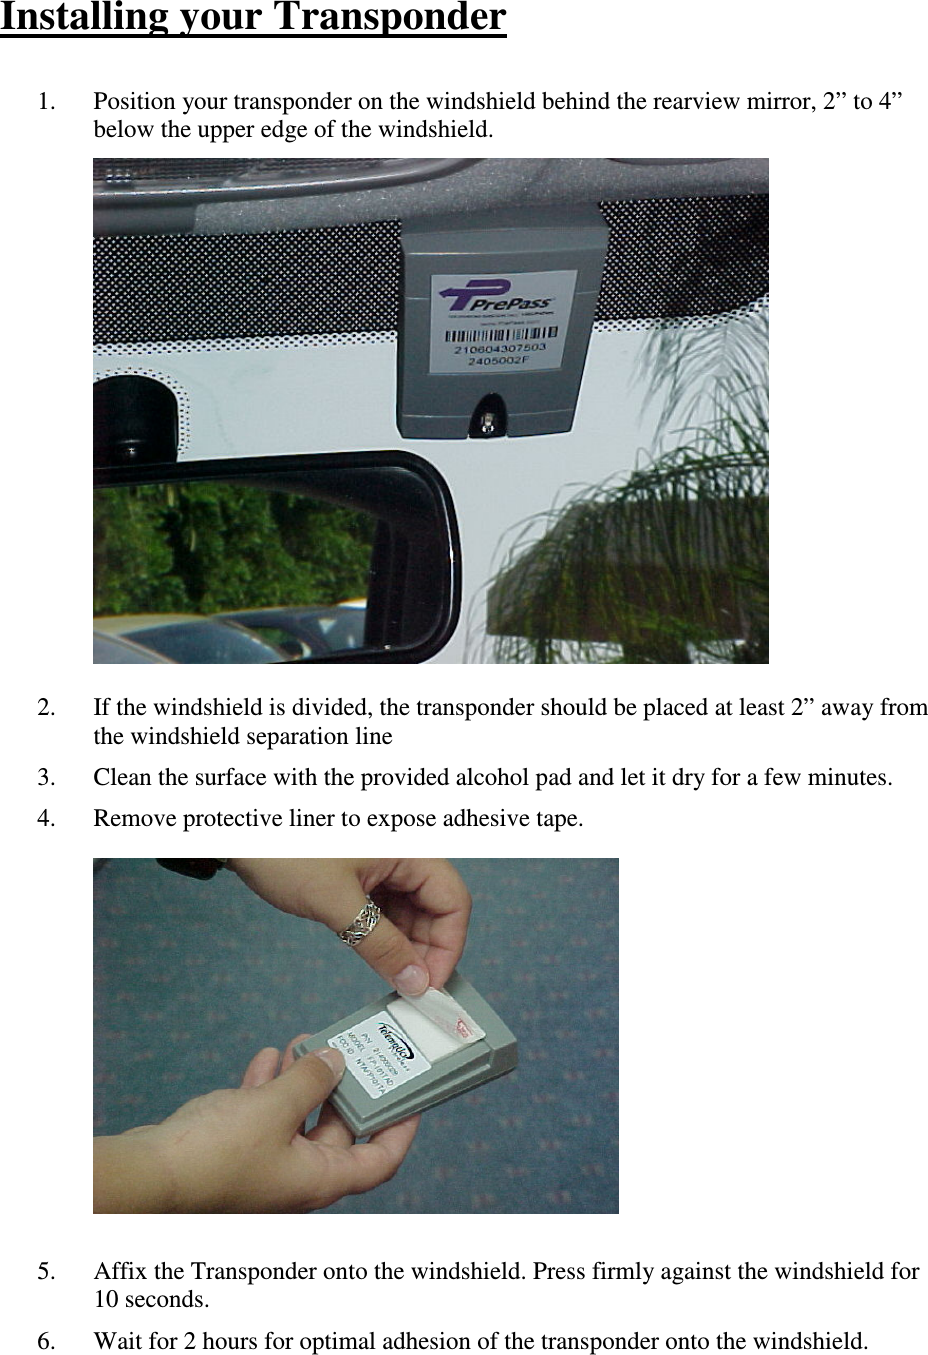 Installing your Transponder  1. Position your transponder on the windshield behind the rearview mirror, 2” to 4” below the upper edge of the windshield.              2. If the windshield is divided, the transponder should be placed at least 2” away from the windshield separation line 3. Clean the surface with the provided alcohol pad and let it dry for a few minutes. 4. Remove protective liner to expose adhesive tape.              5. Affix the Transponder onto the windshield. Press firmly against the windshield for 10 seconds. 6. Wait for 2 hours for optimal adhesion of the transponder onto the windshield. 